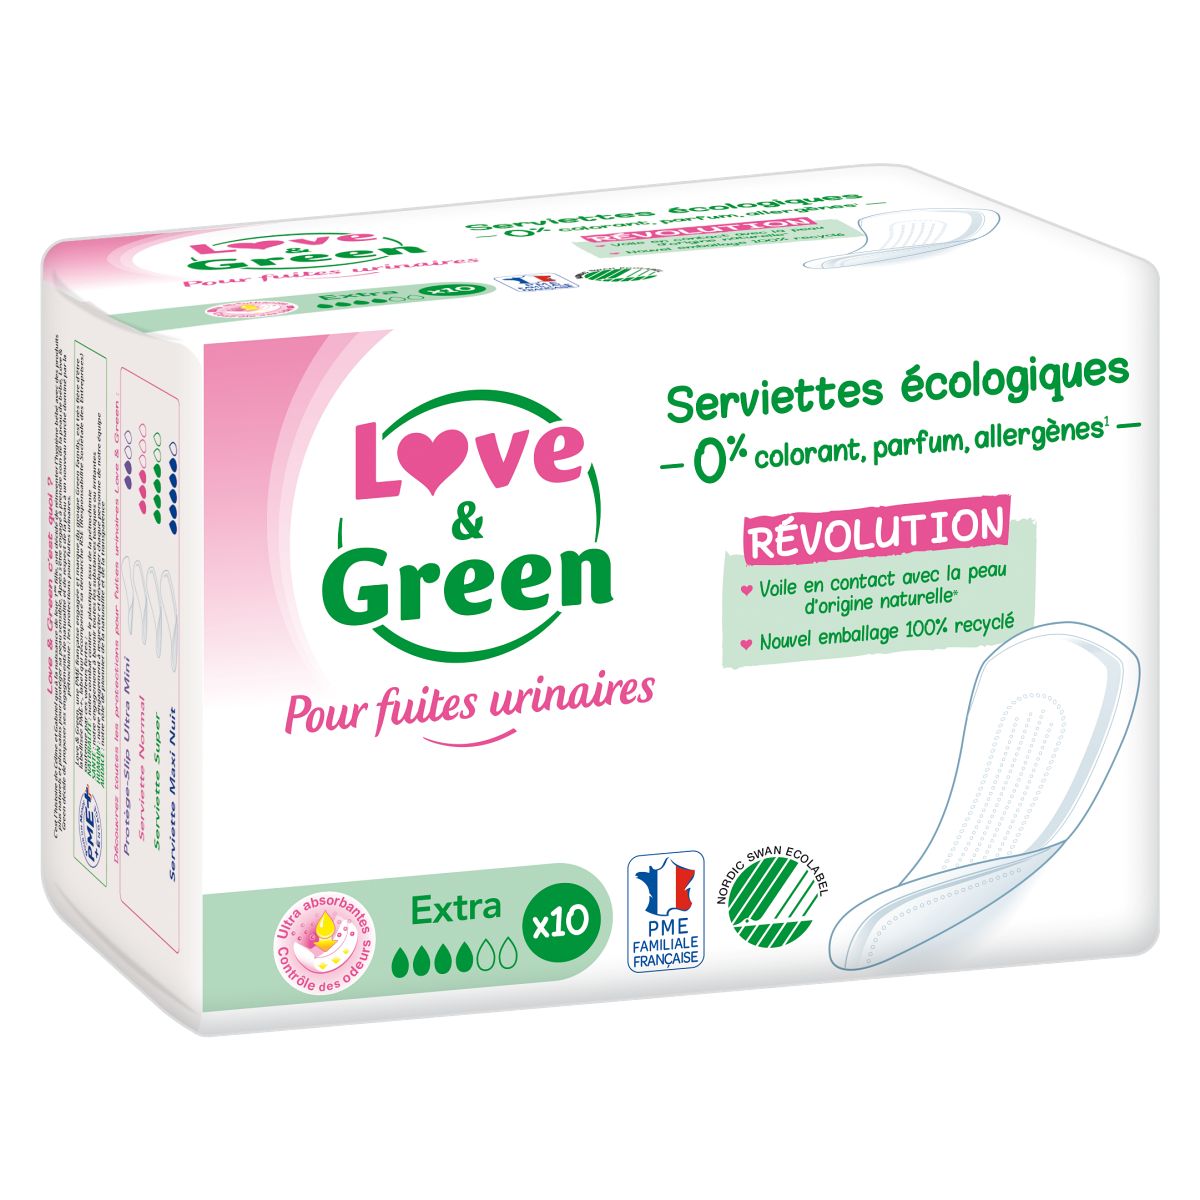 Serviettes incontinence urinaire Extra super urinaires Love and green  hypoallergéniques